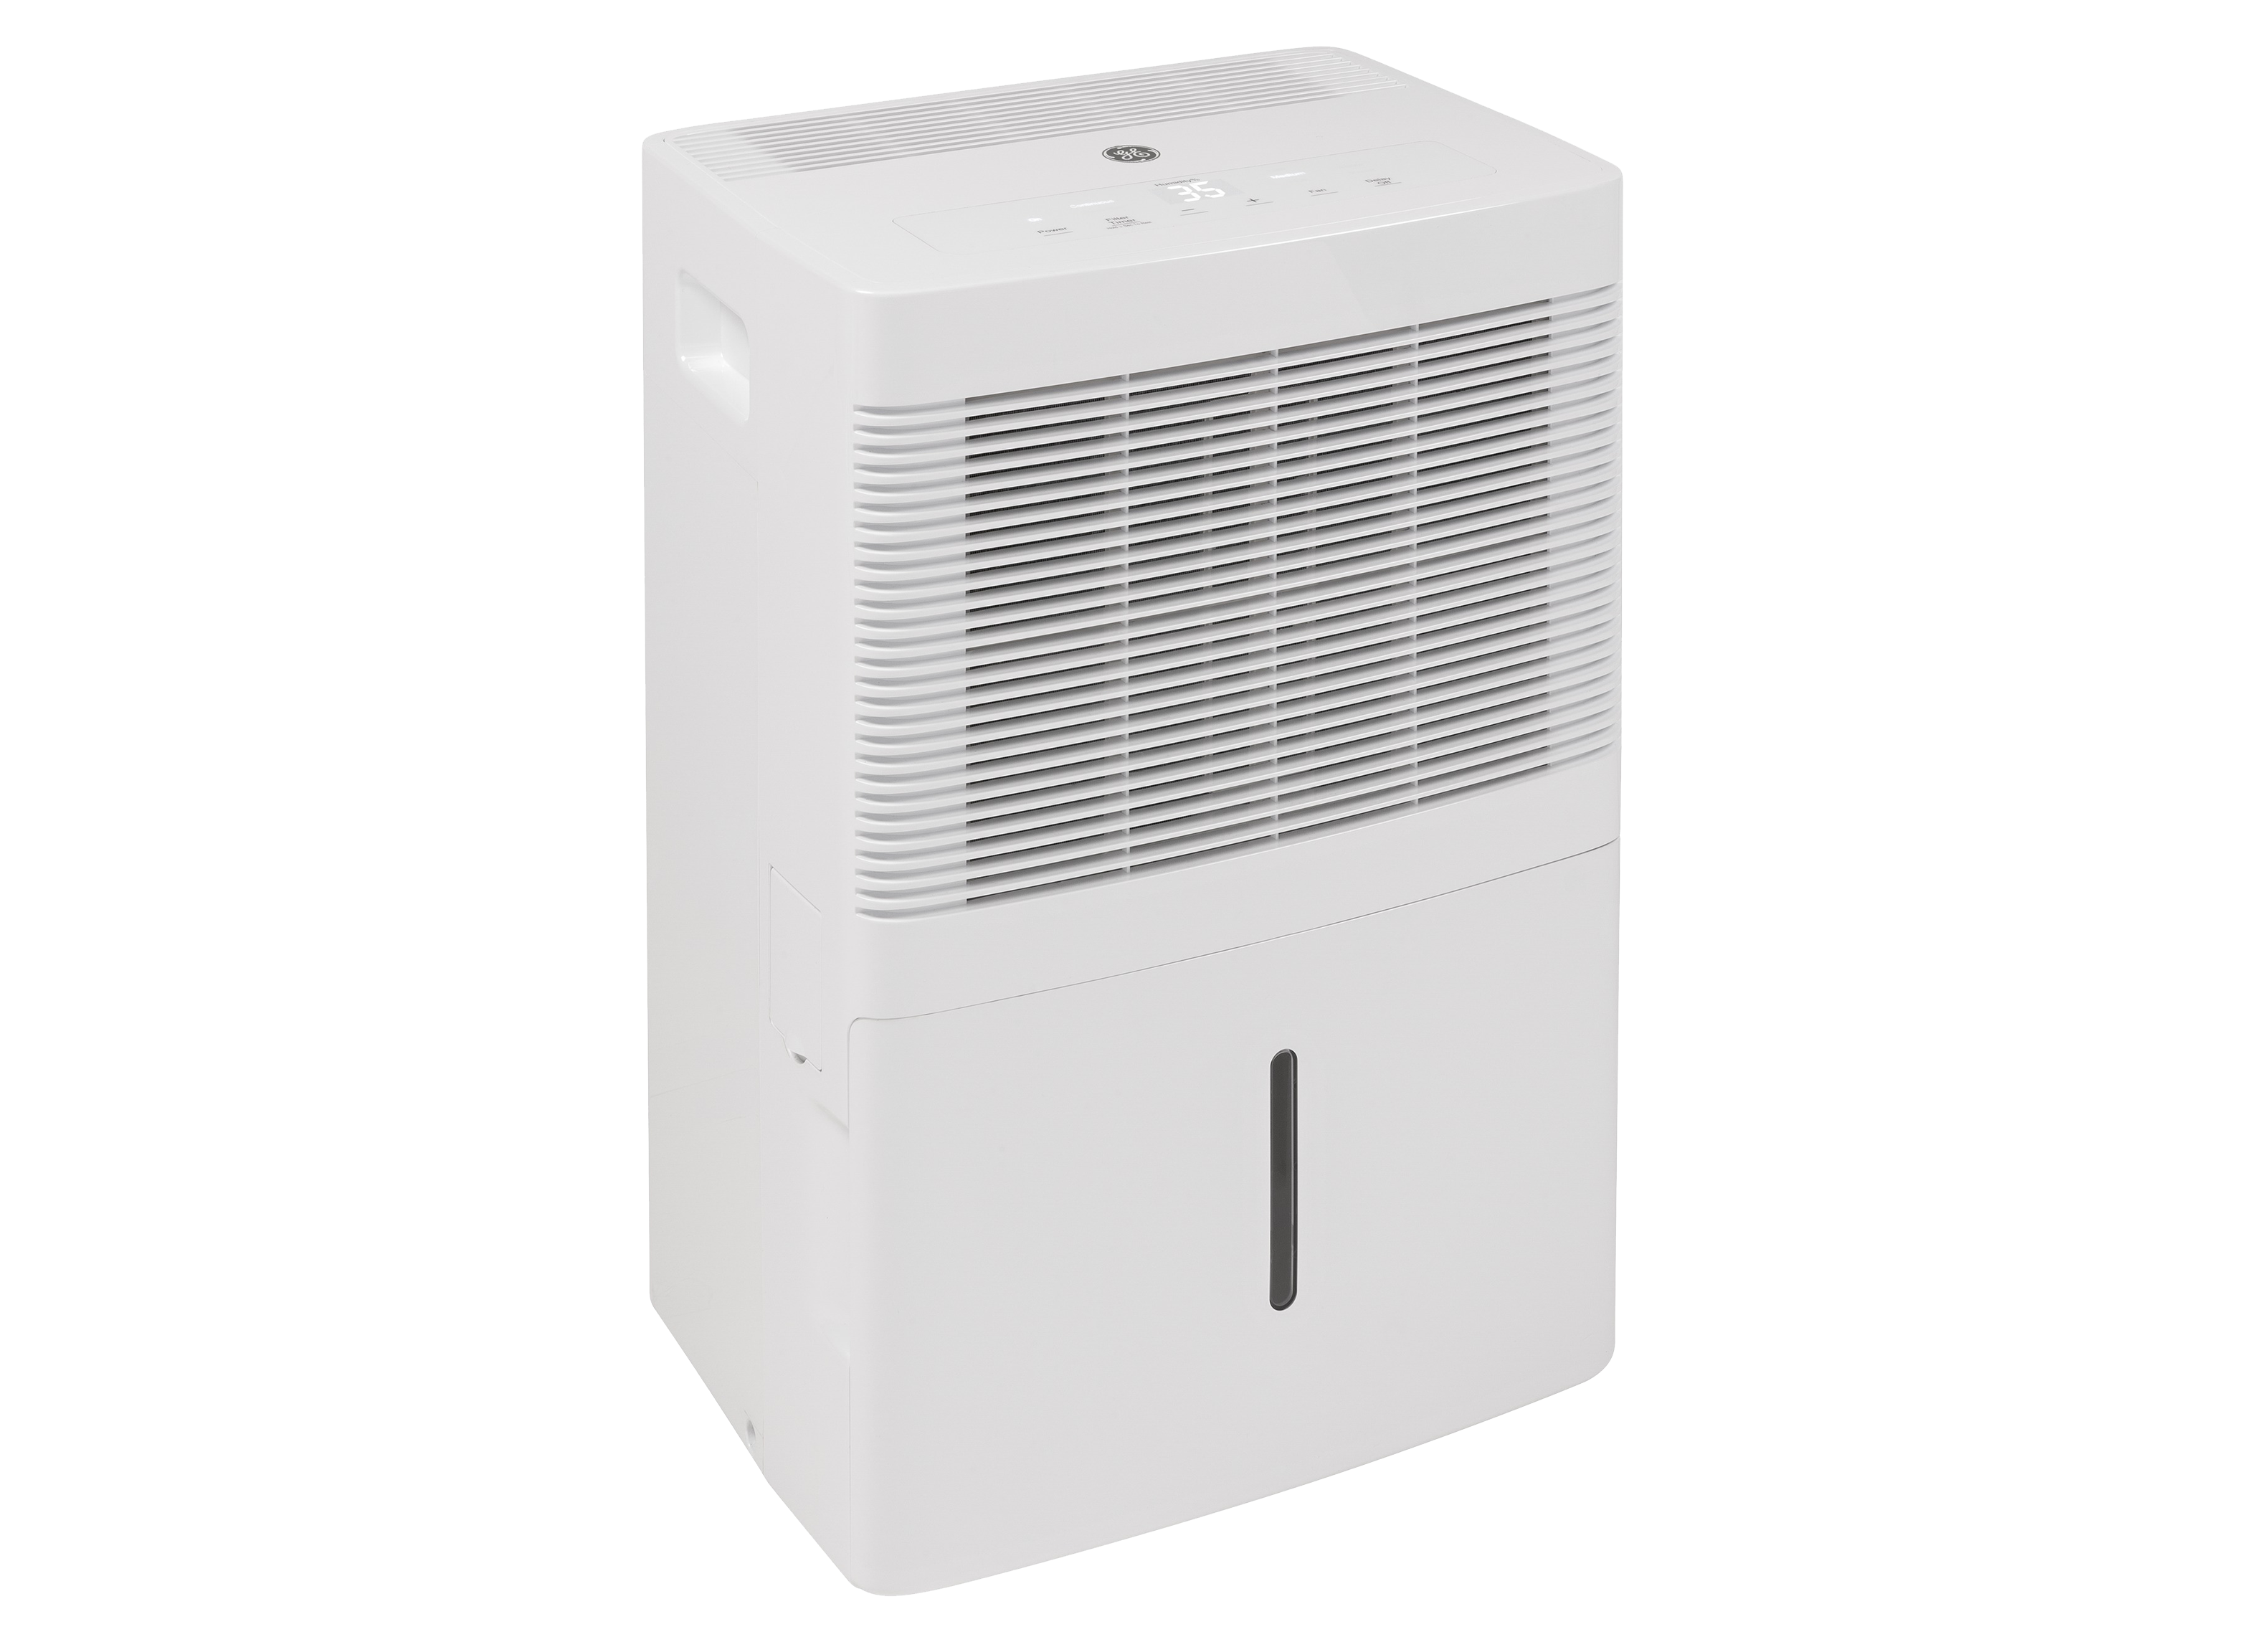 GE ADEL20LY Portable Home Dehumidifier for sale online 